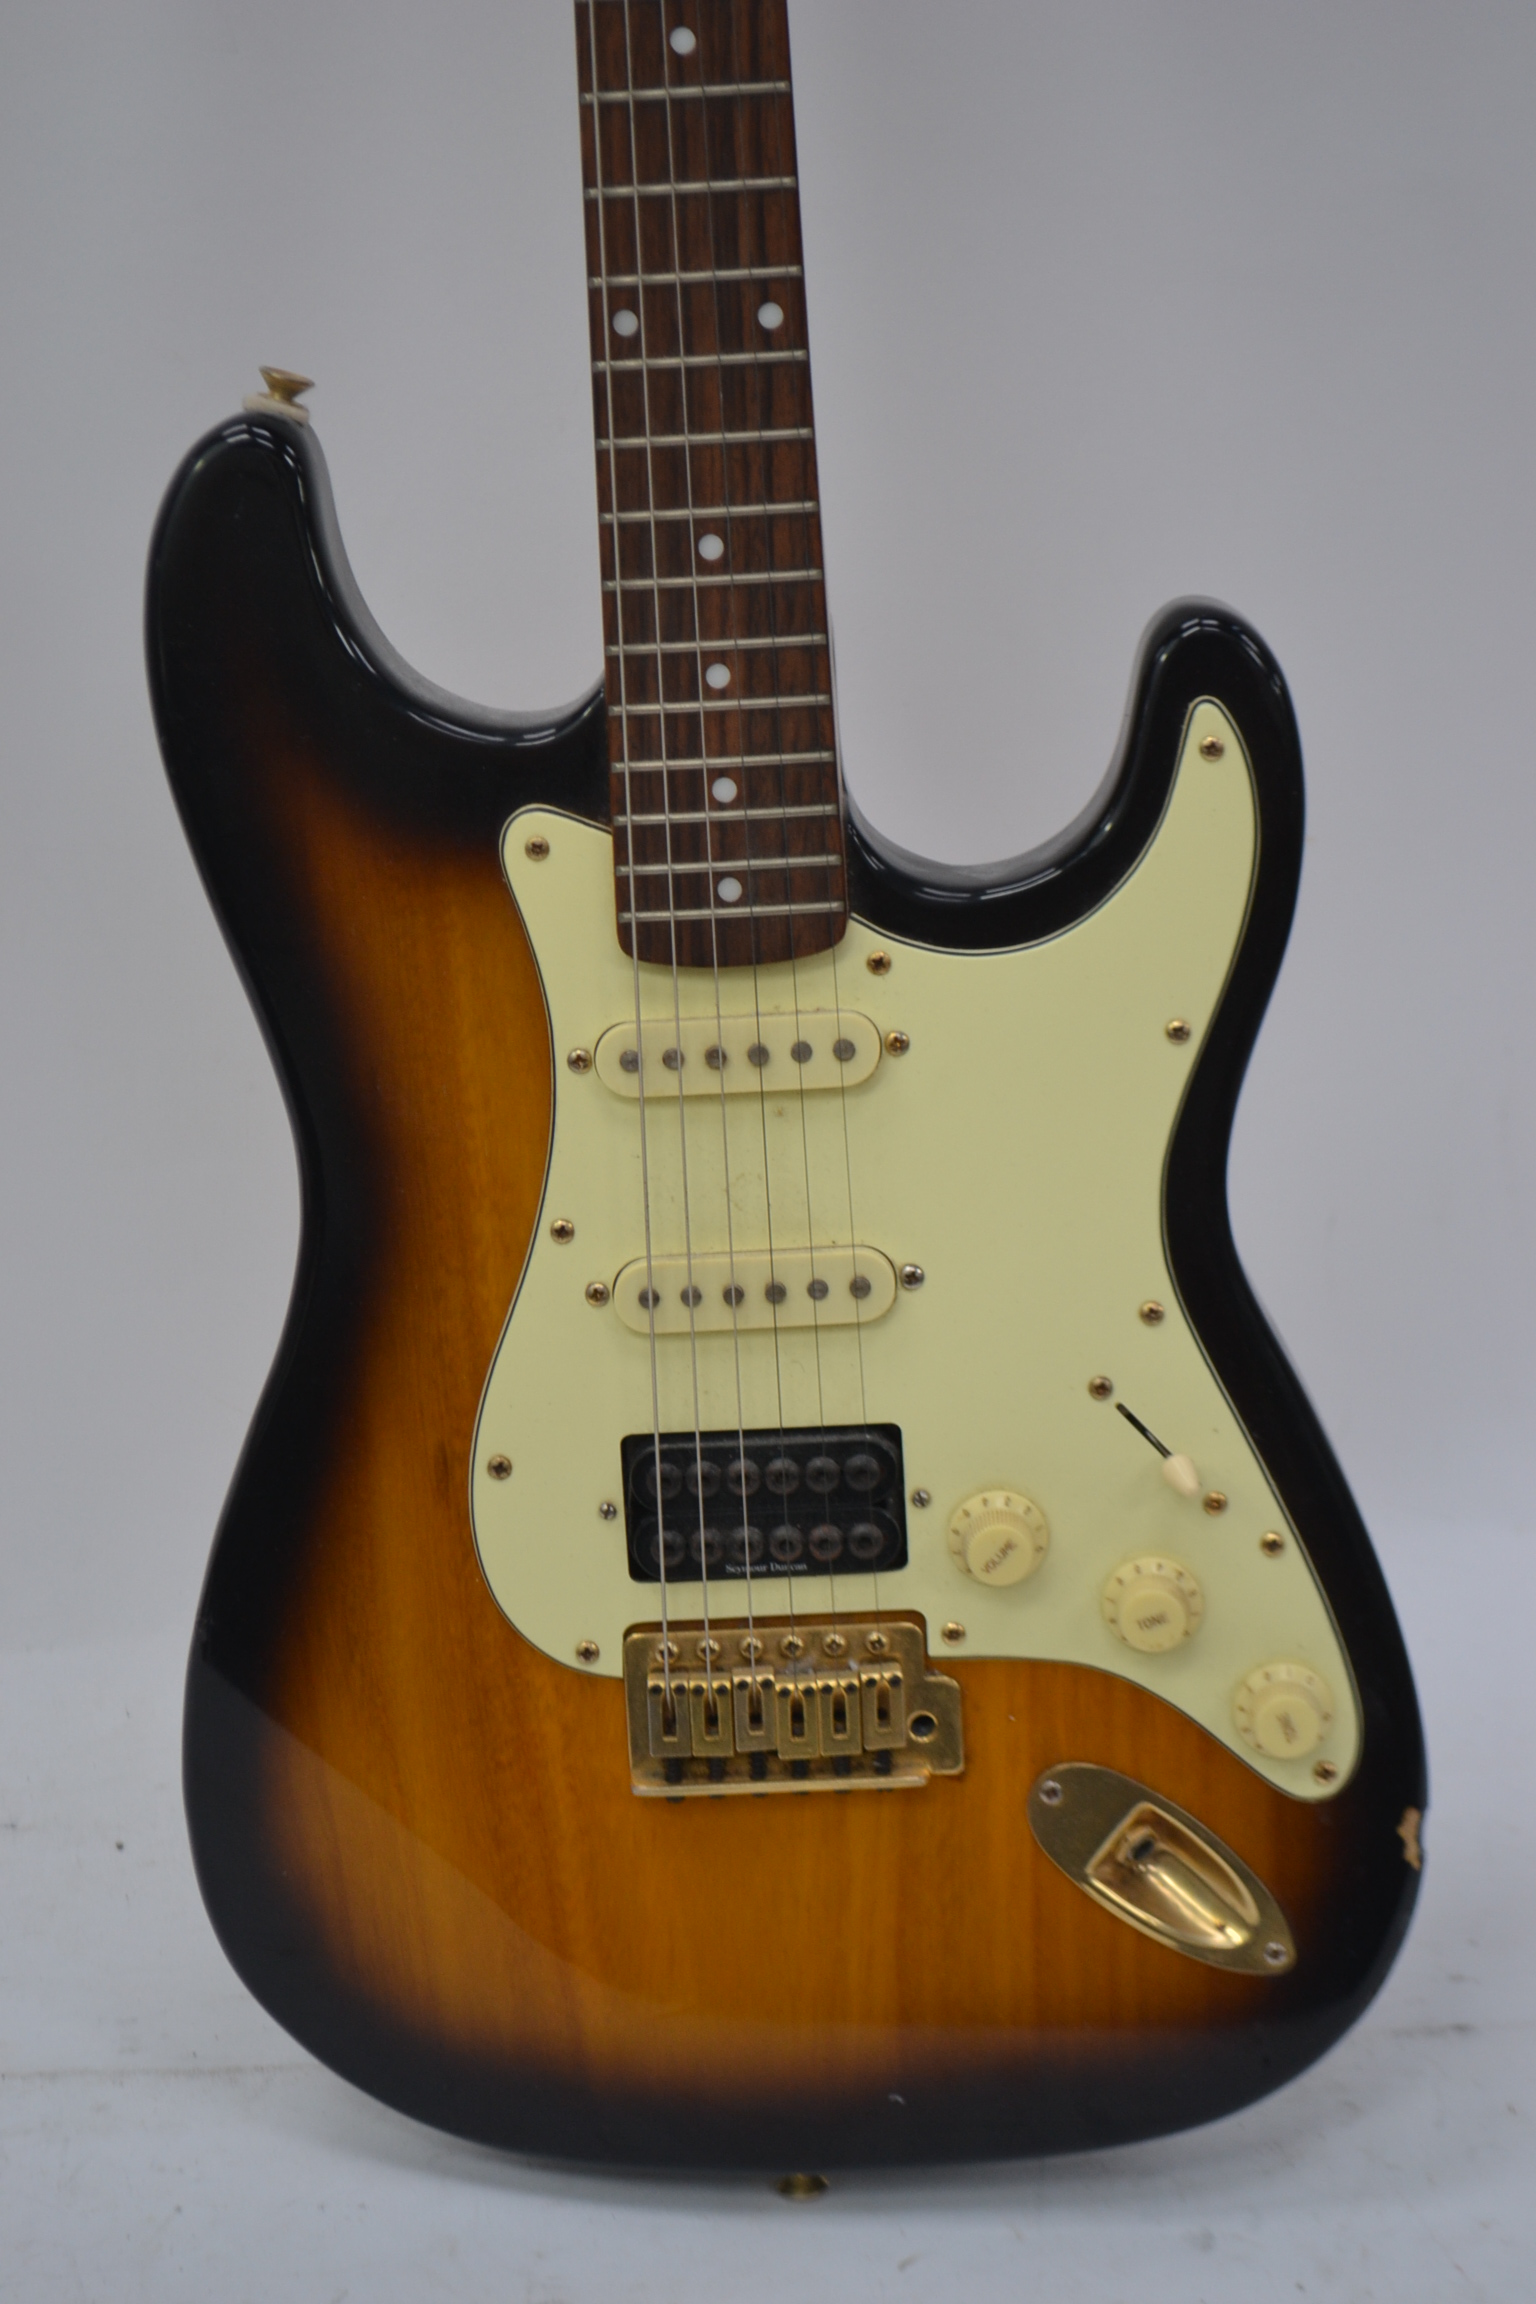 A two tone tobacco sunburst Tanglewood electric guitar.